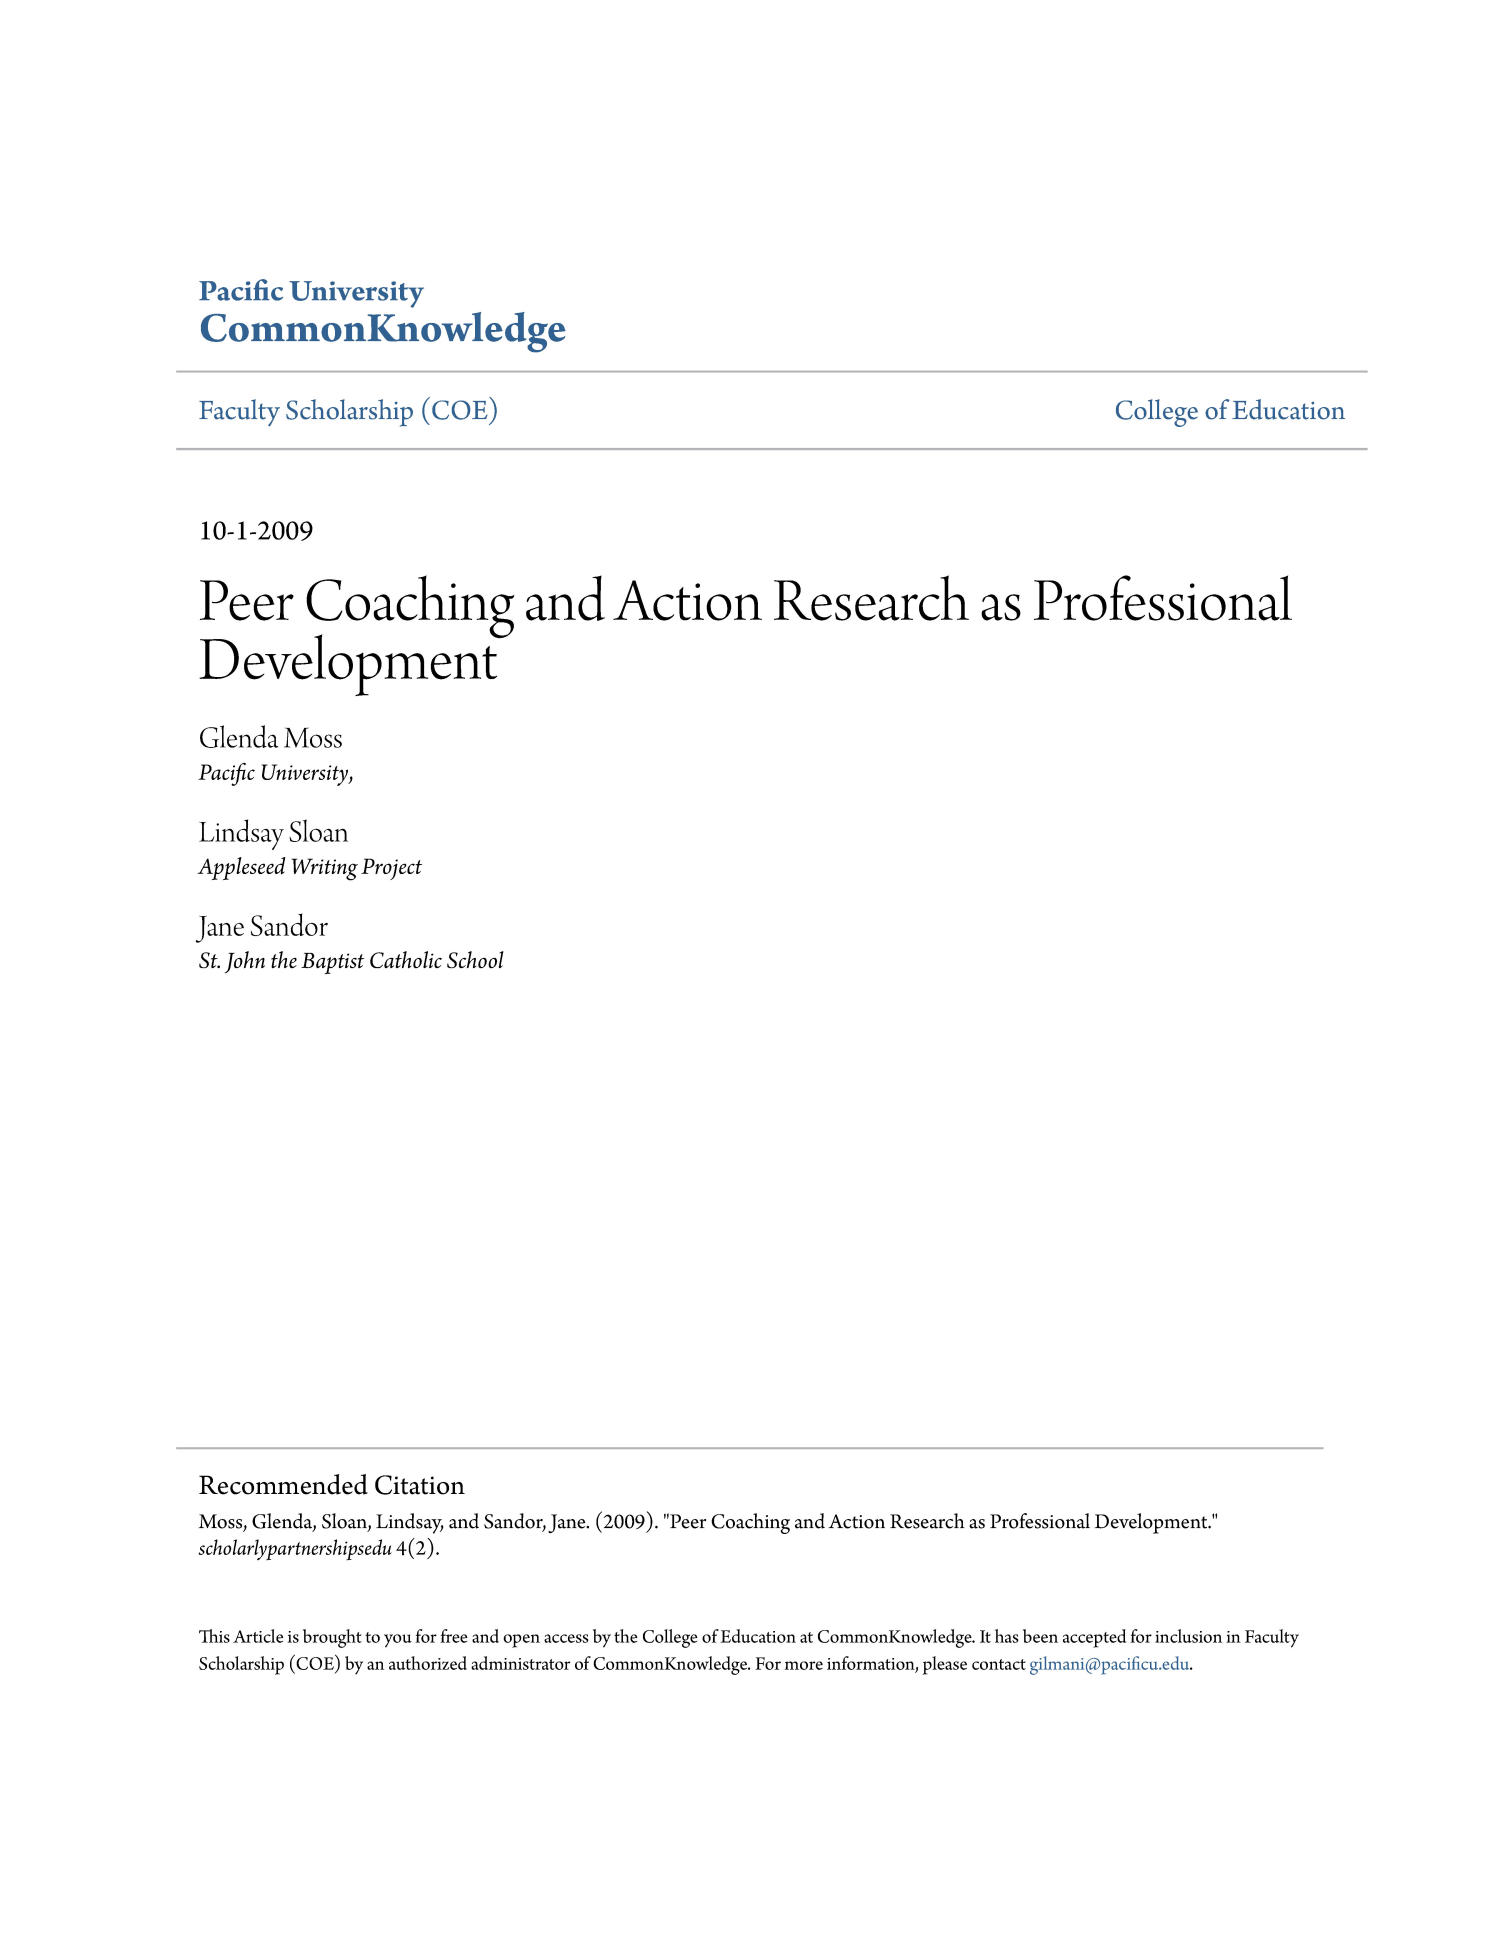 Peer Coaching and Action Research as Professional Development
                                                
                                                    Title Page
                                                